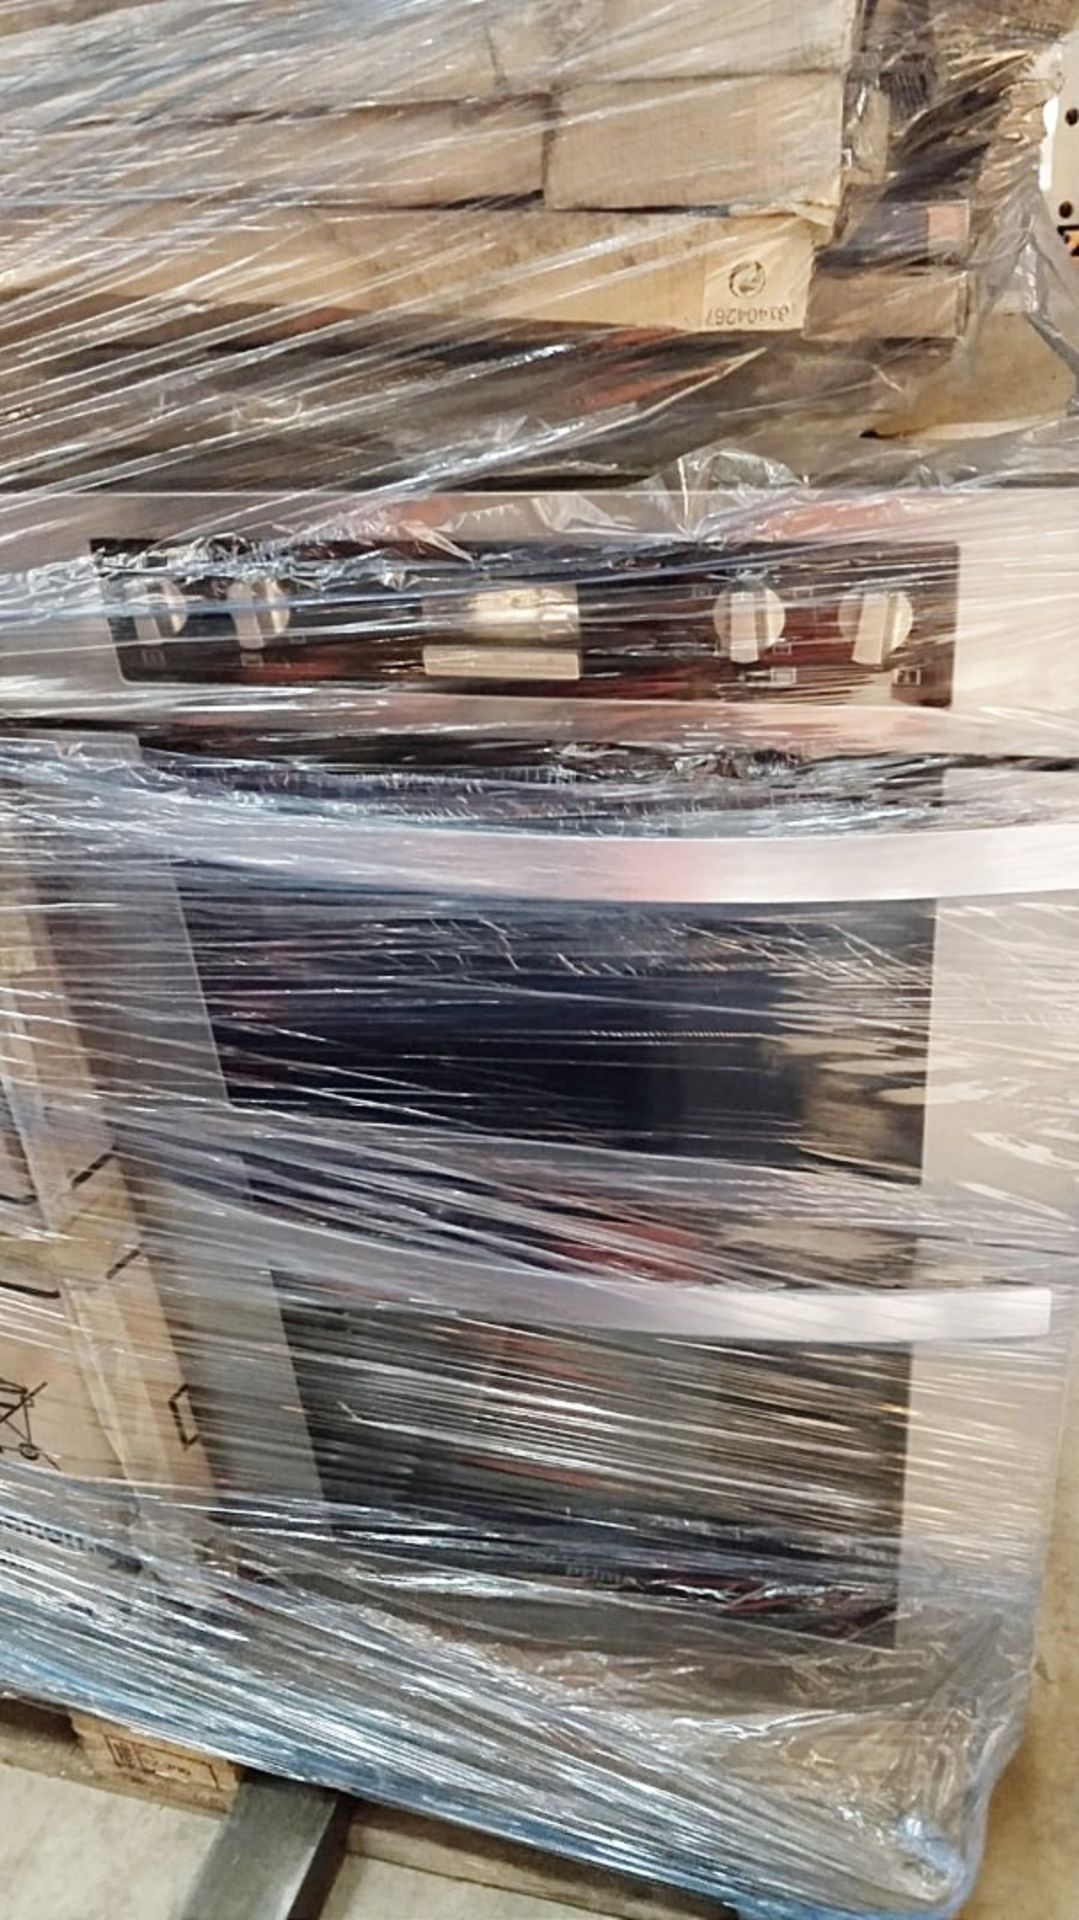 1 x Pallet of Unchecked Customer Raw Returns featuring Domestic Appliances - WH2 - CL011 - Location: - Image 2 of 7